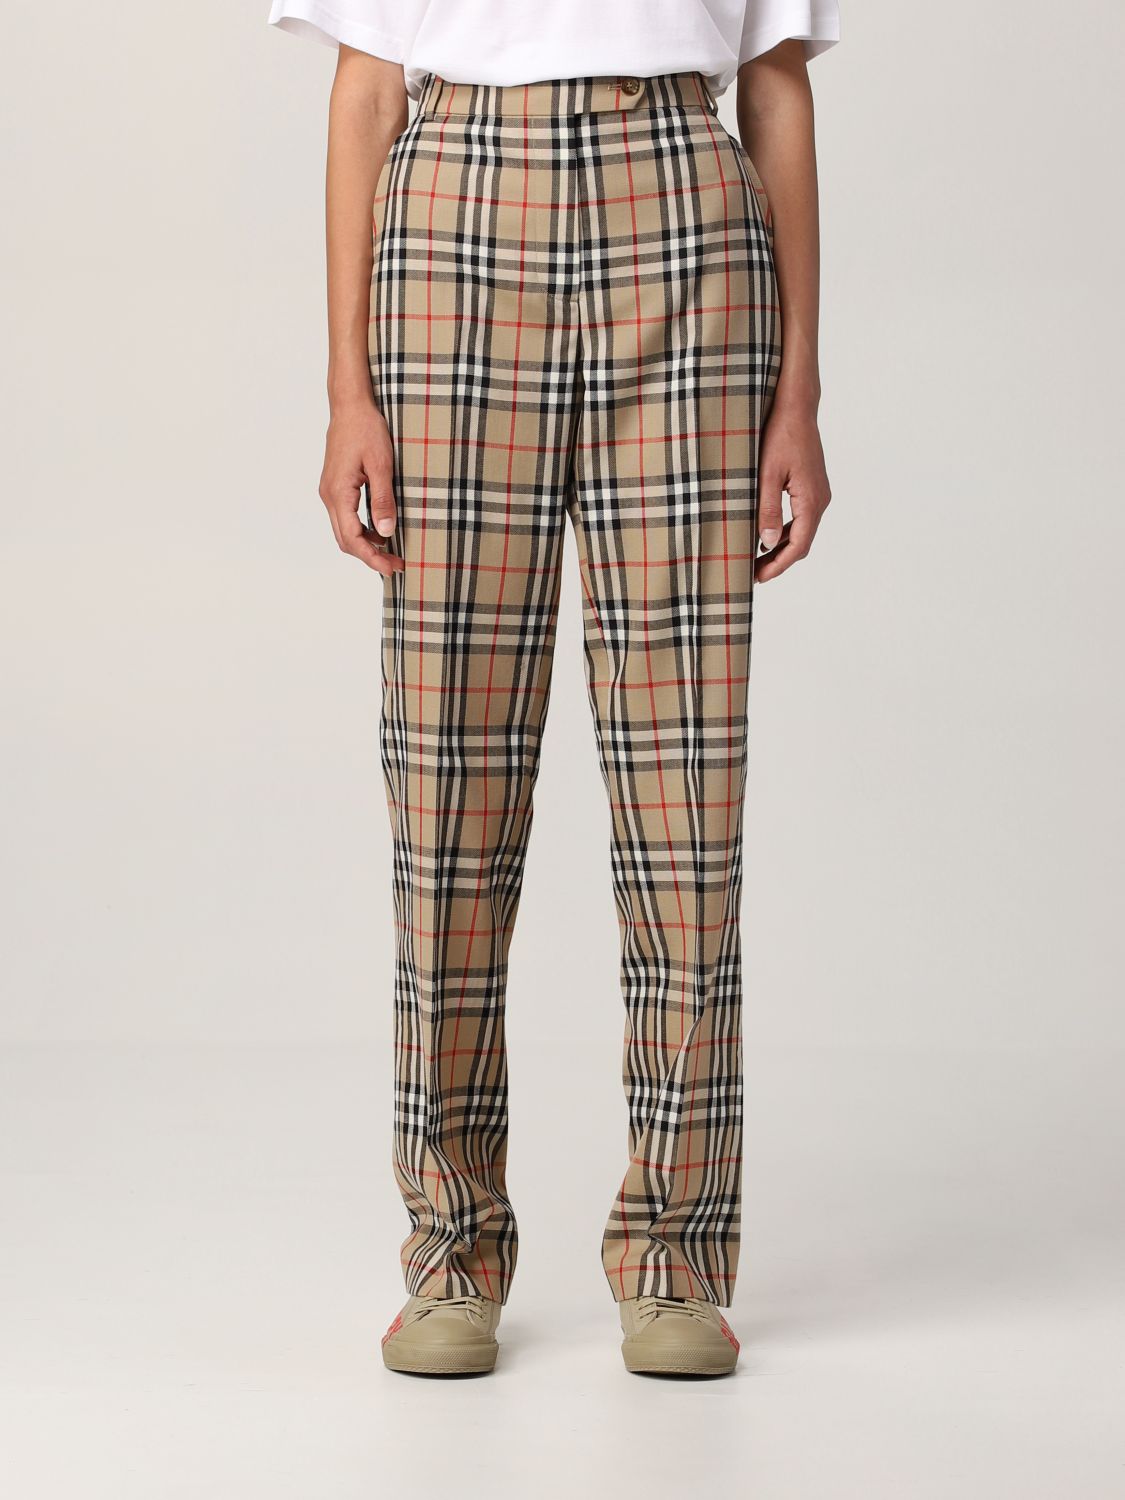 Burberry Check Pants for Women for sale  eBay